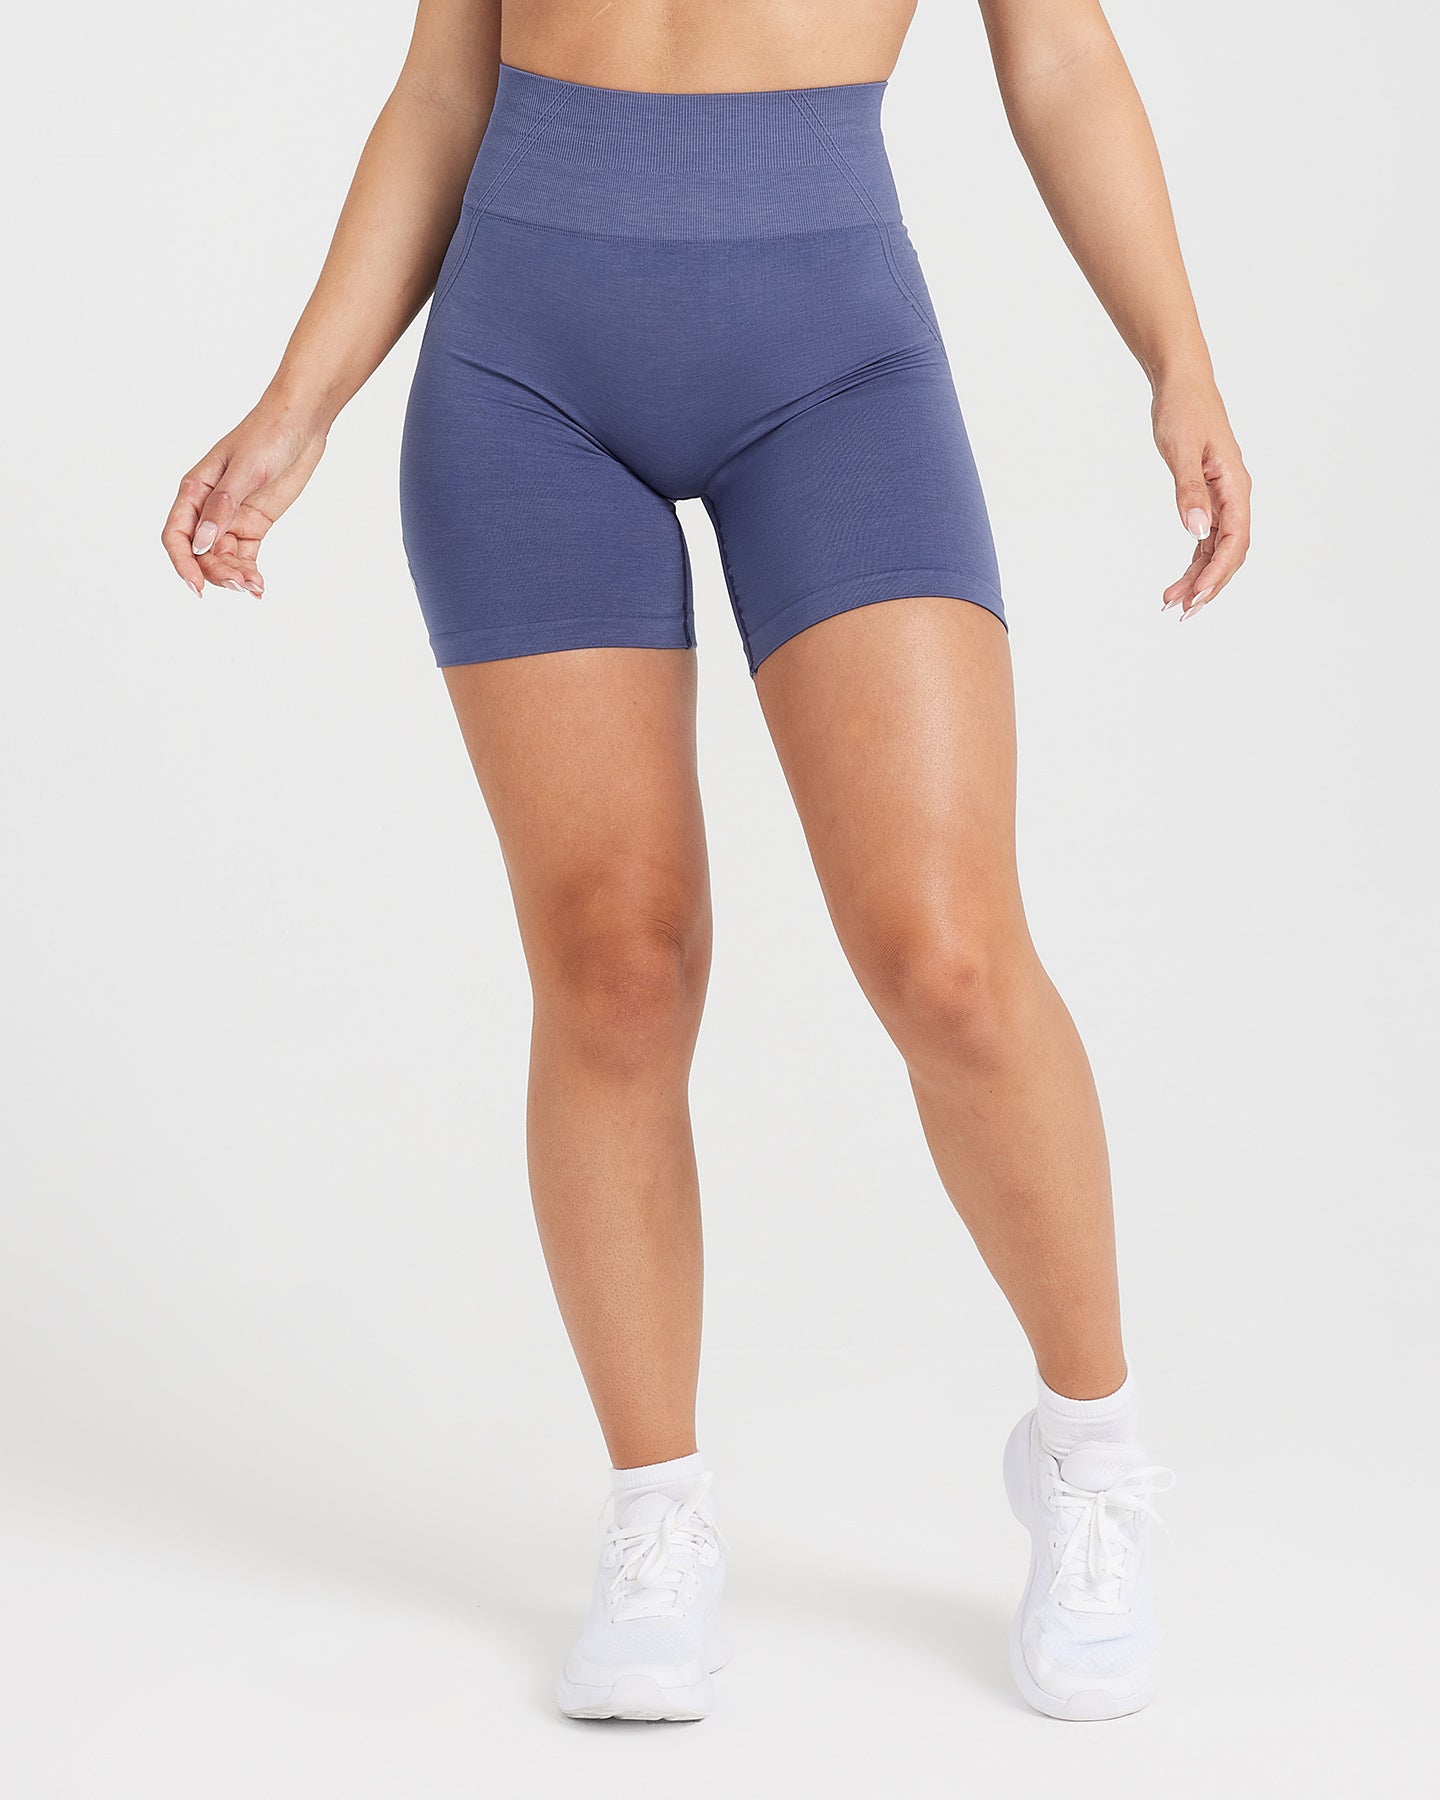 Shorts - Active Slate Blue US for Women Oner | Cycling